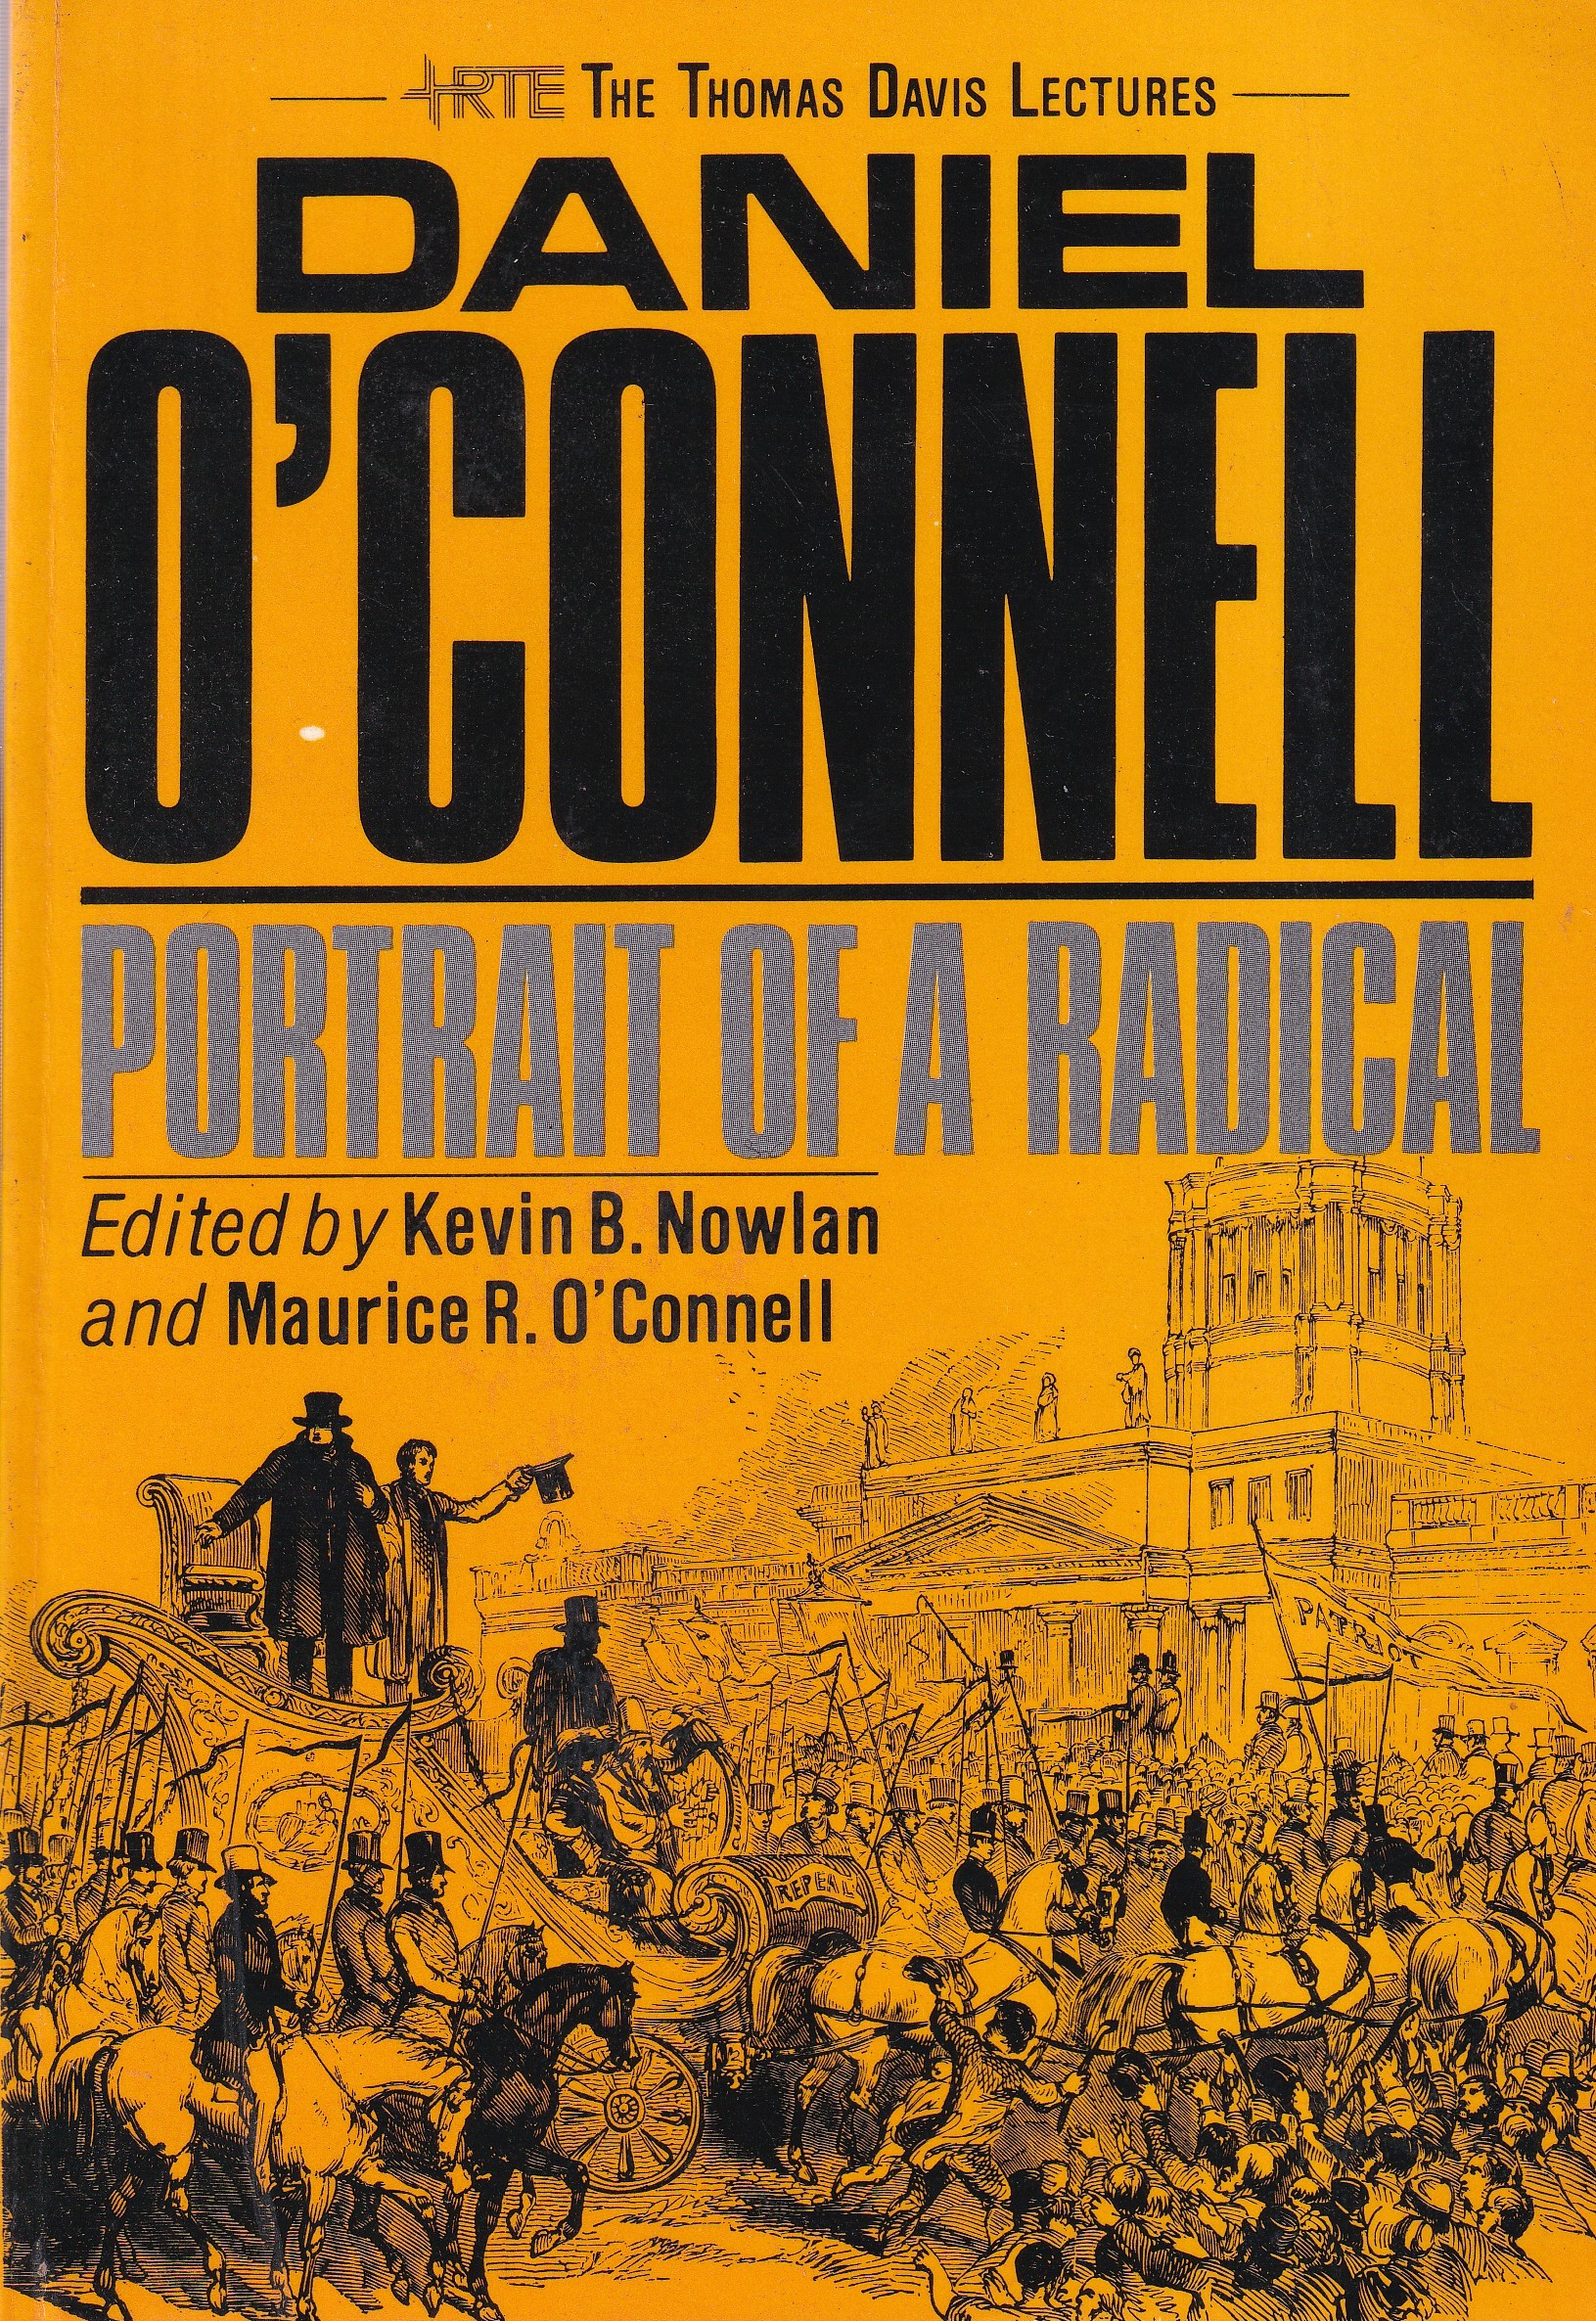 Daniel O’Connell: Portrait of a Radical by Kevin B. Nowlan and Maurice R. O'Connell (eds.)